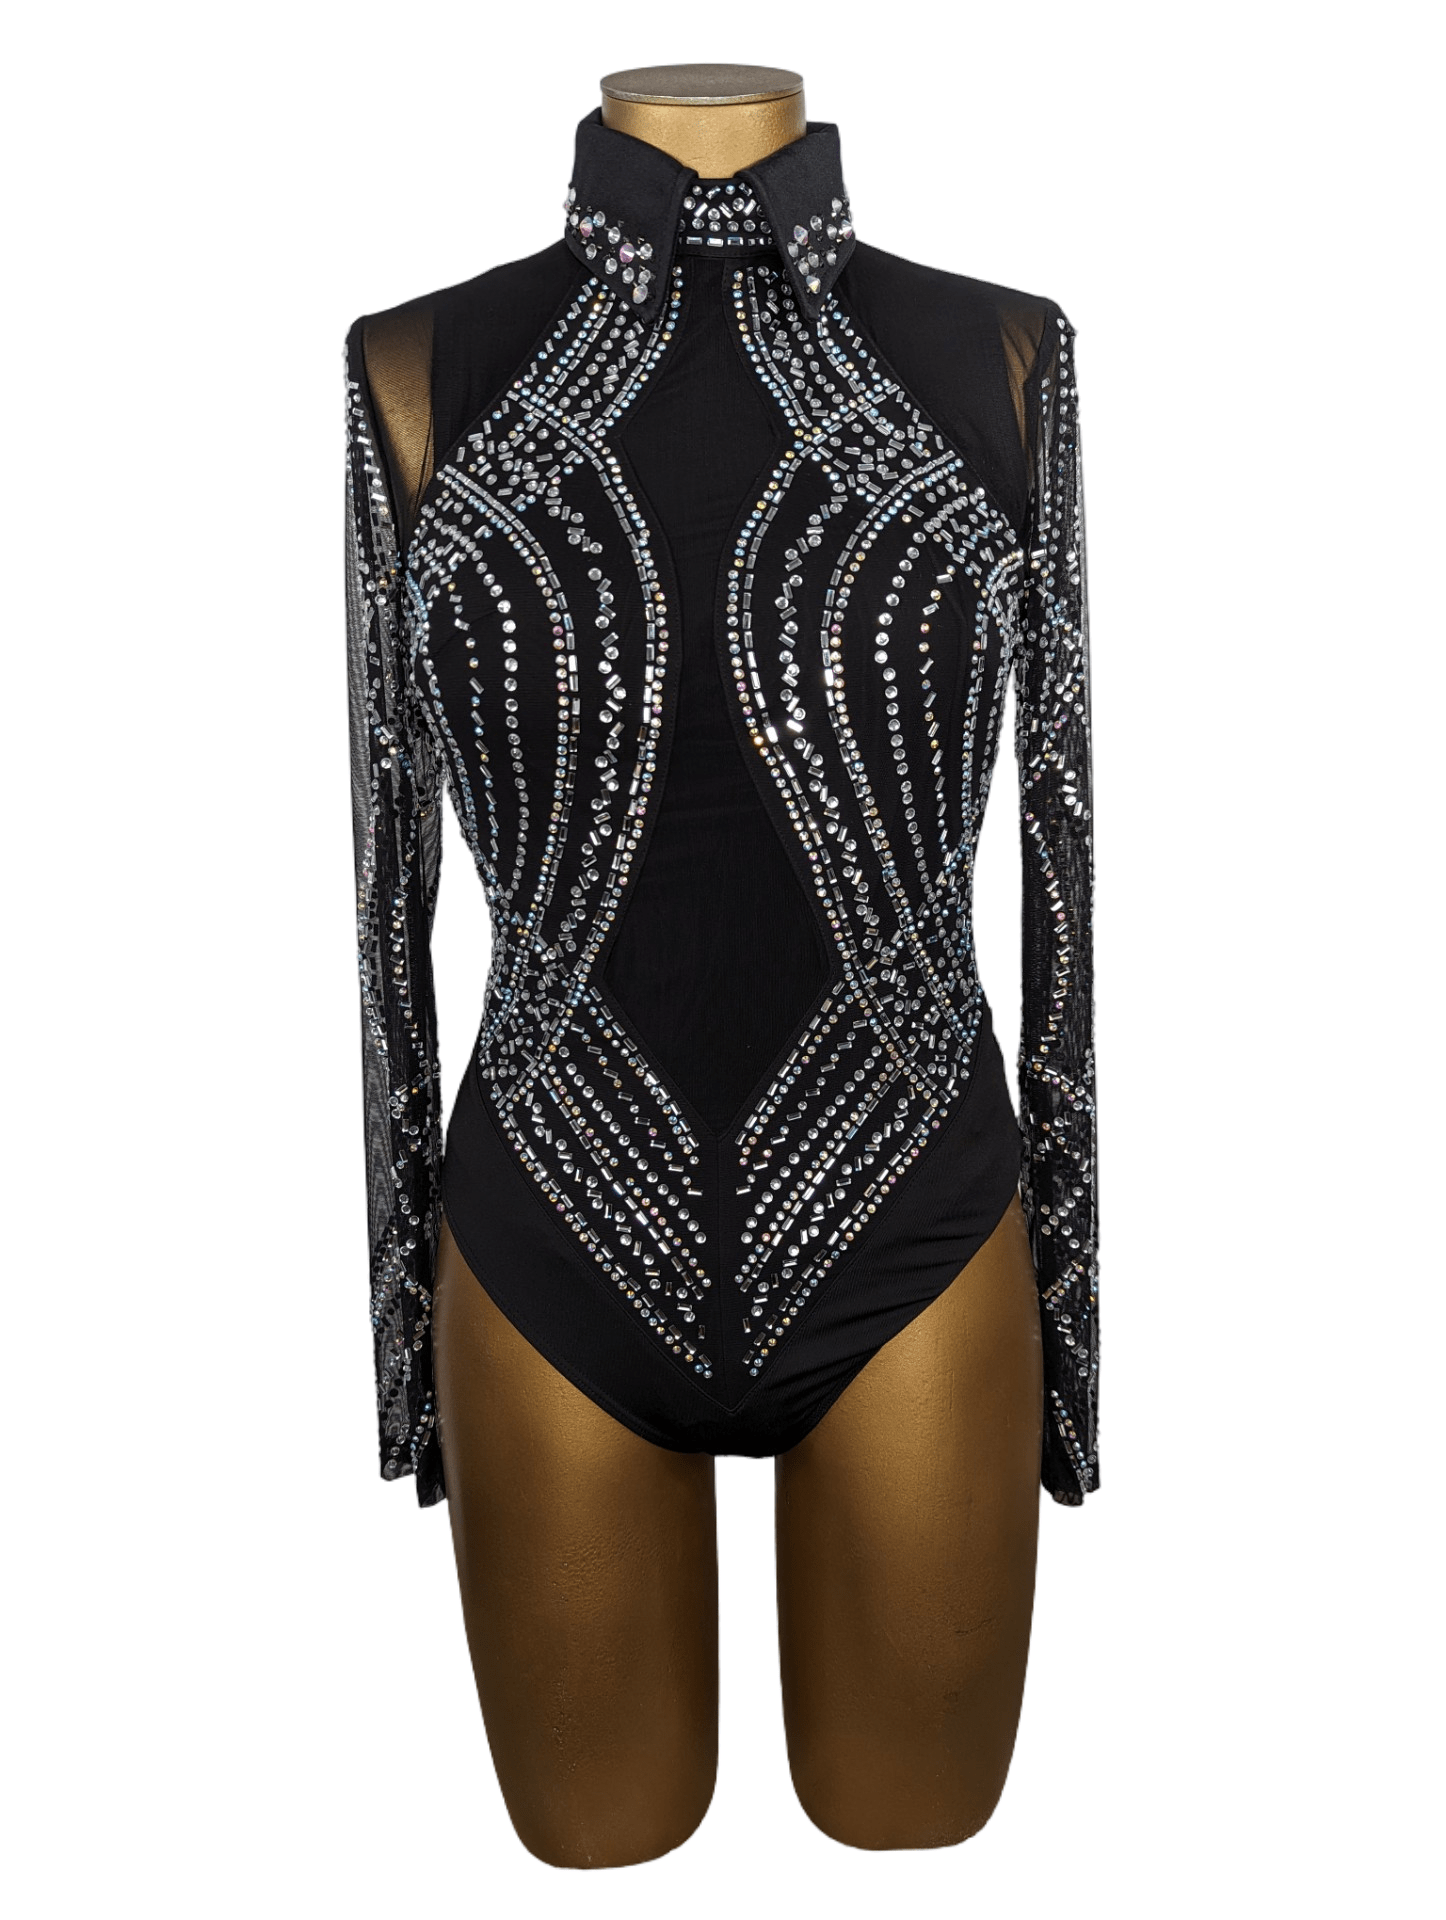 sparkle-ridge-womens-western-wear-affordable-show-clothes-horse-shirts-with-bling-rodeo-bodysuit-black-aces-front.png (Copy) (Copy)